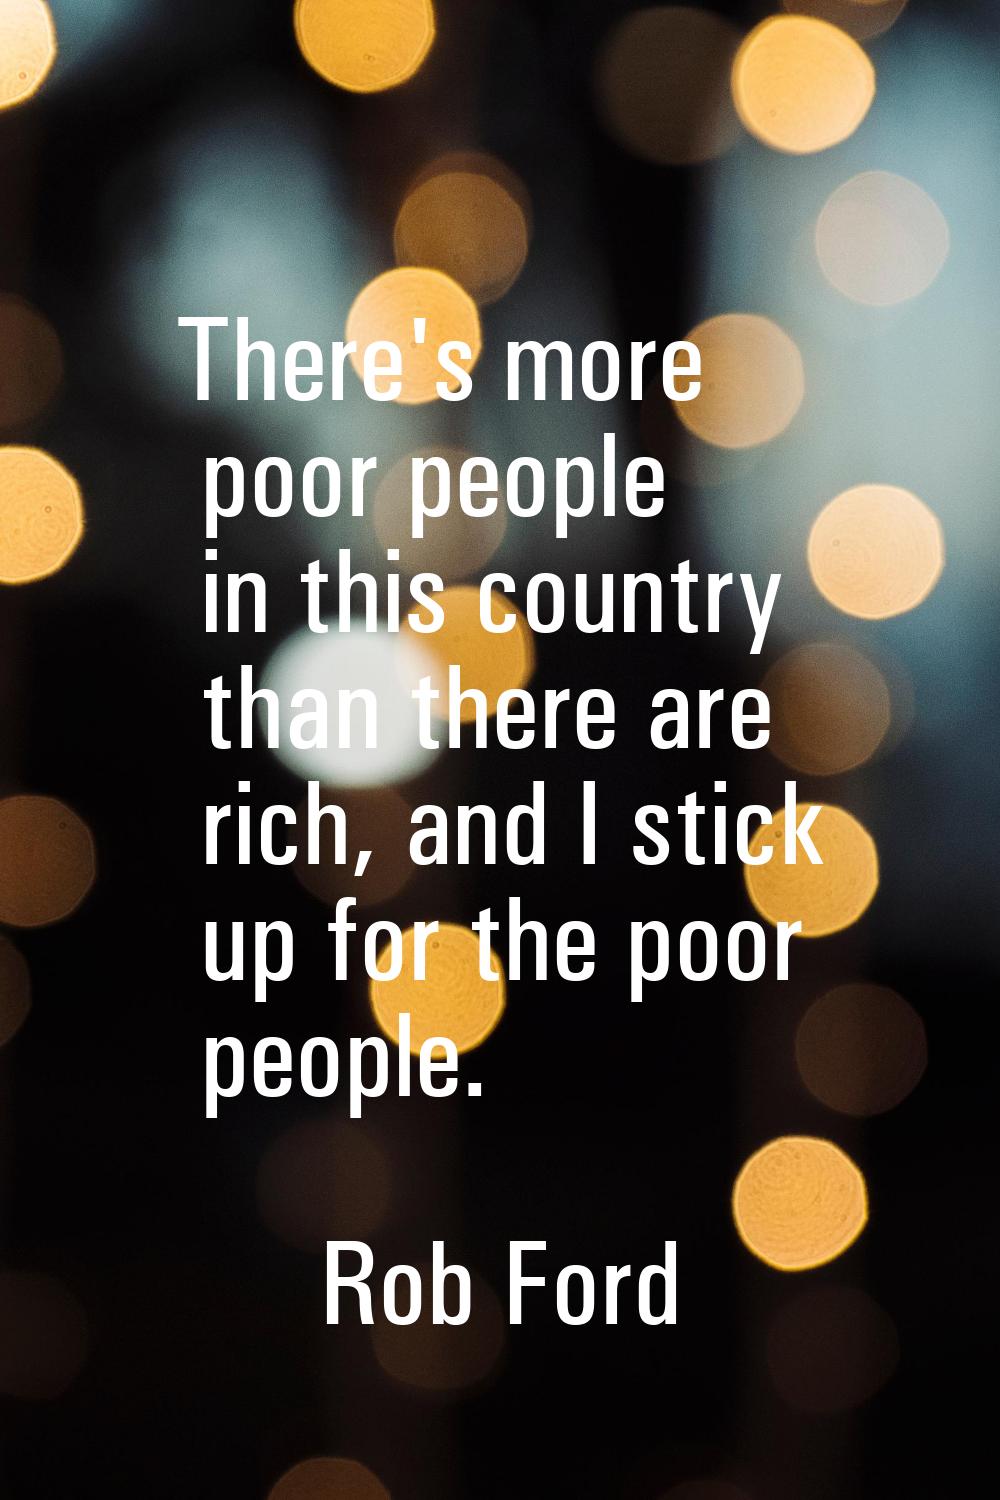 There's more poor people in this country than there are rich, and I stick up for the poor people.